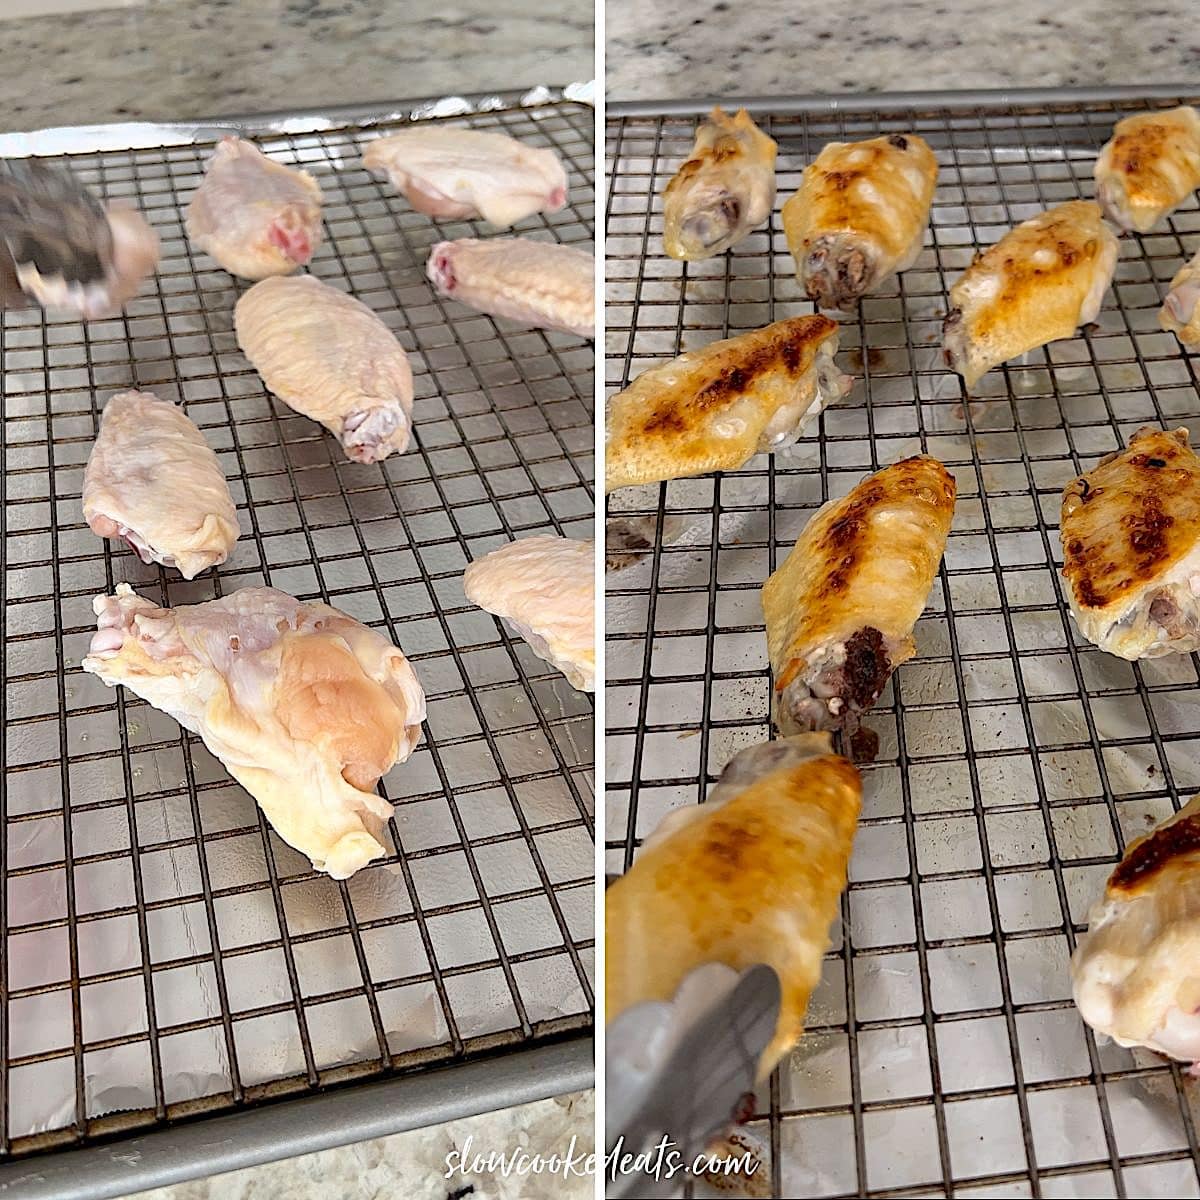 Broiling chicken wings on a baking sheet with a rack.